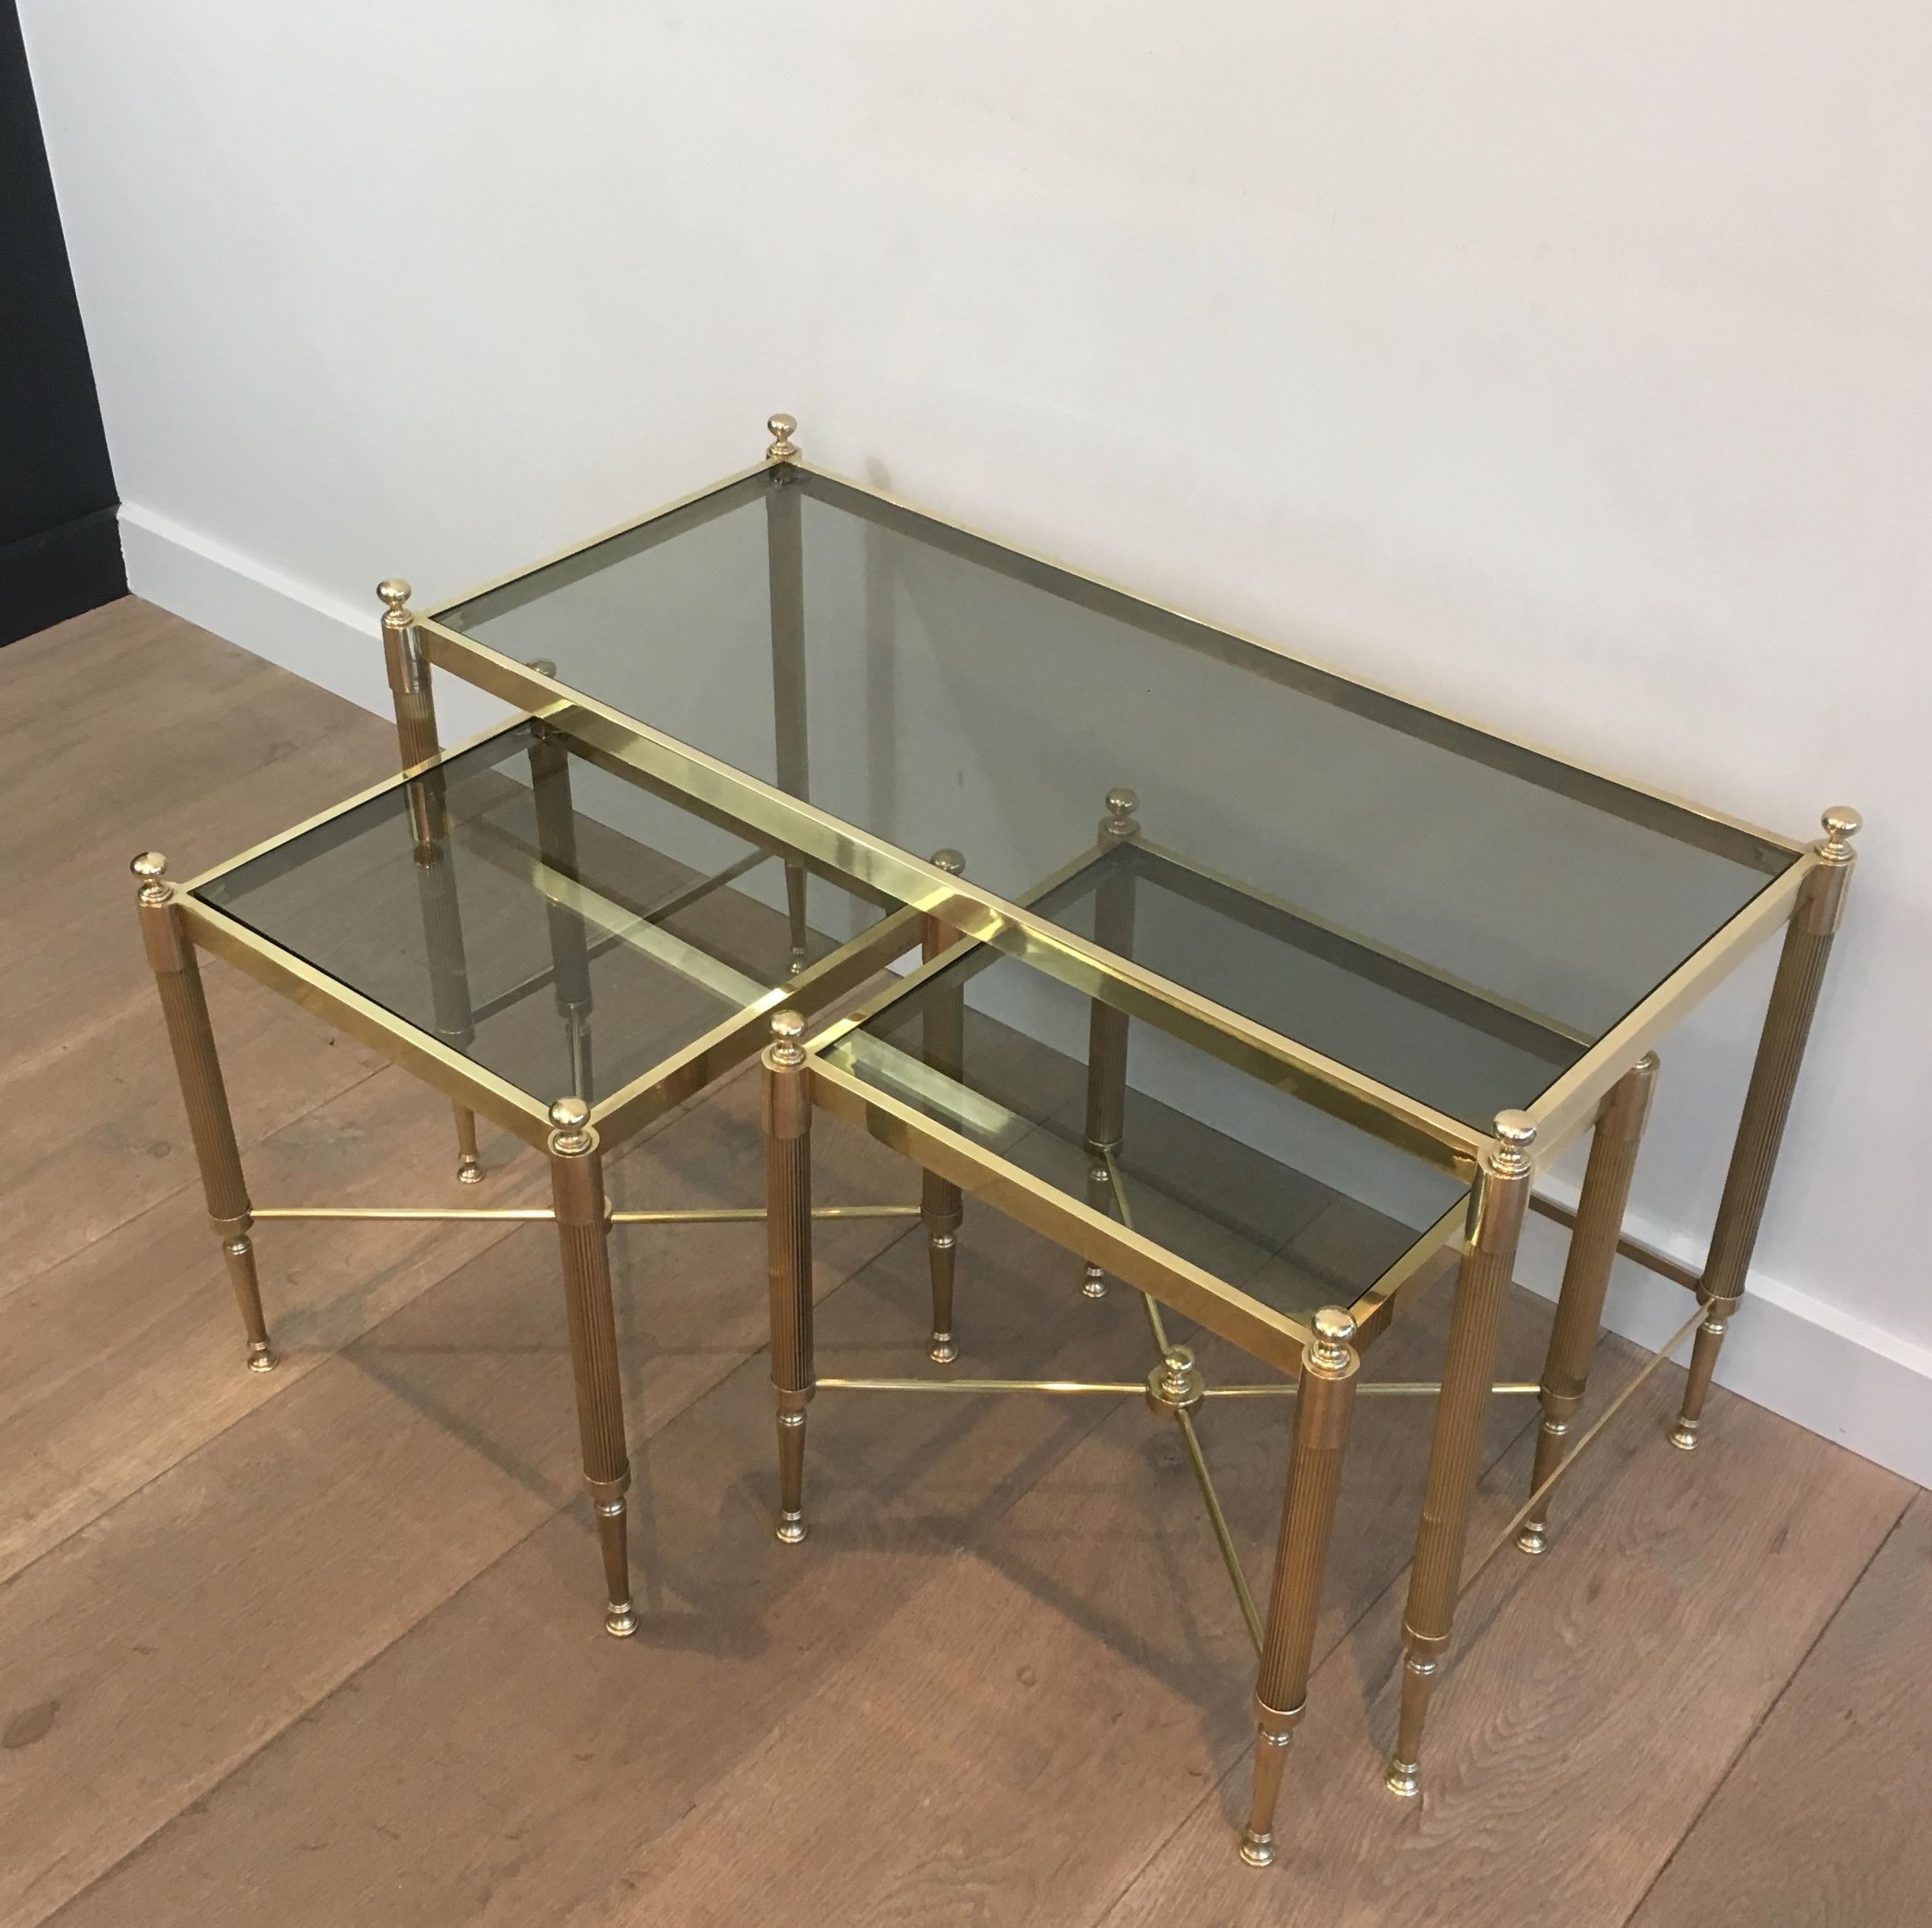 Tripartite Brass Coffee Table made of a Main Table and 2 Nesting Side Tables 11